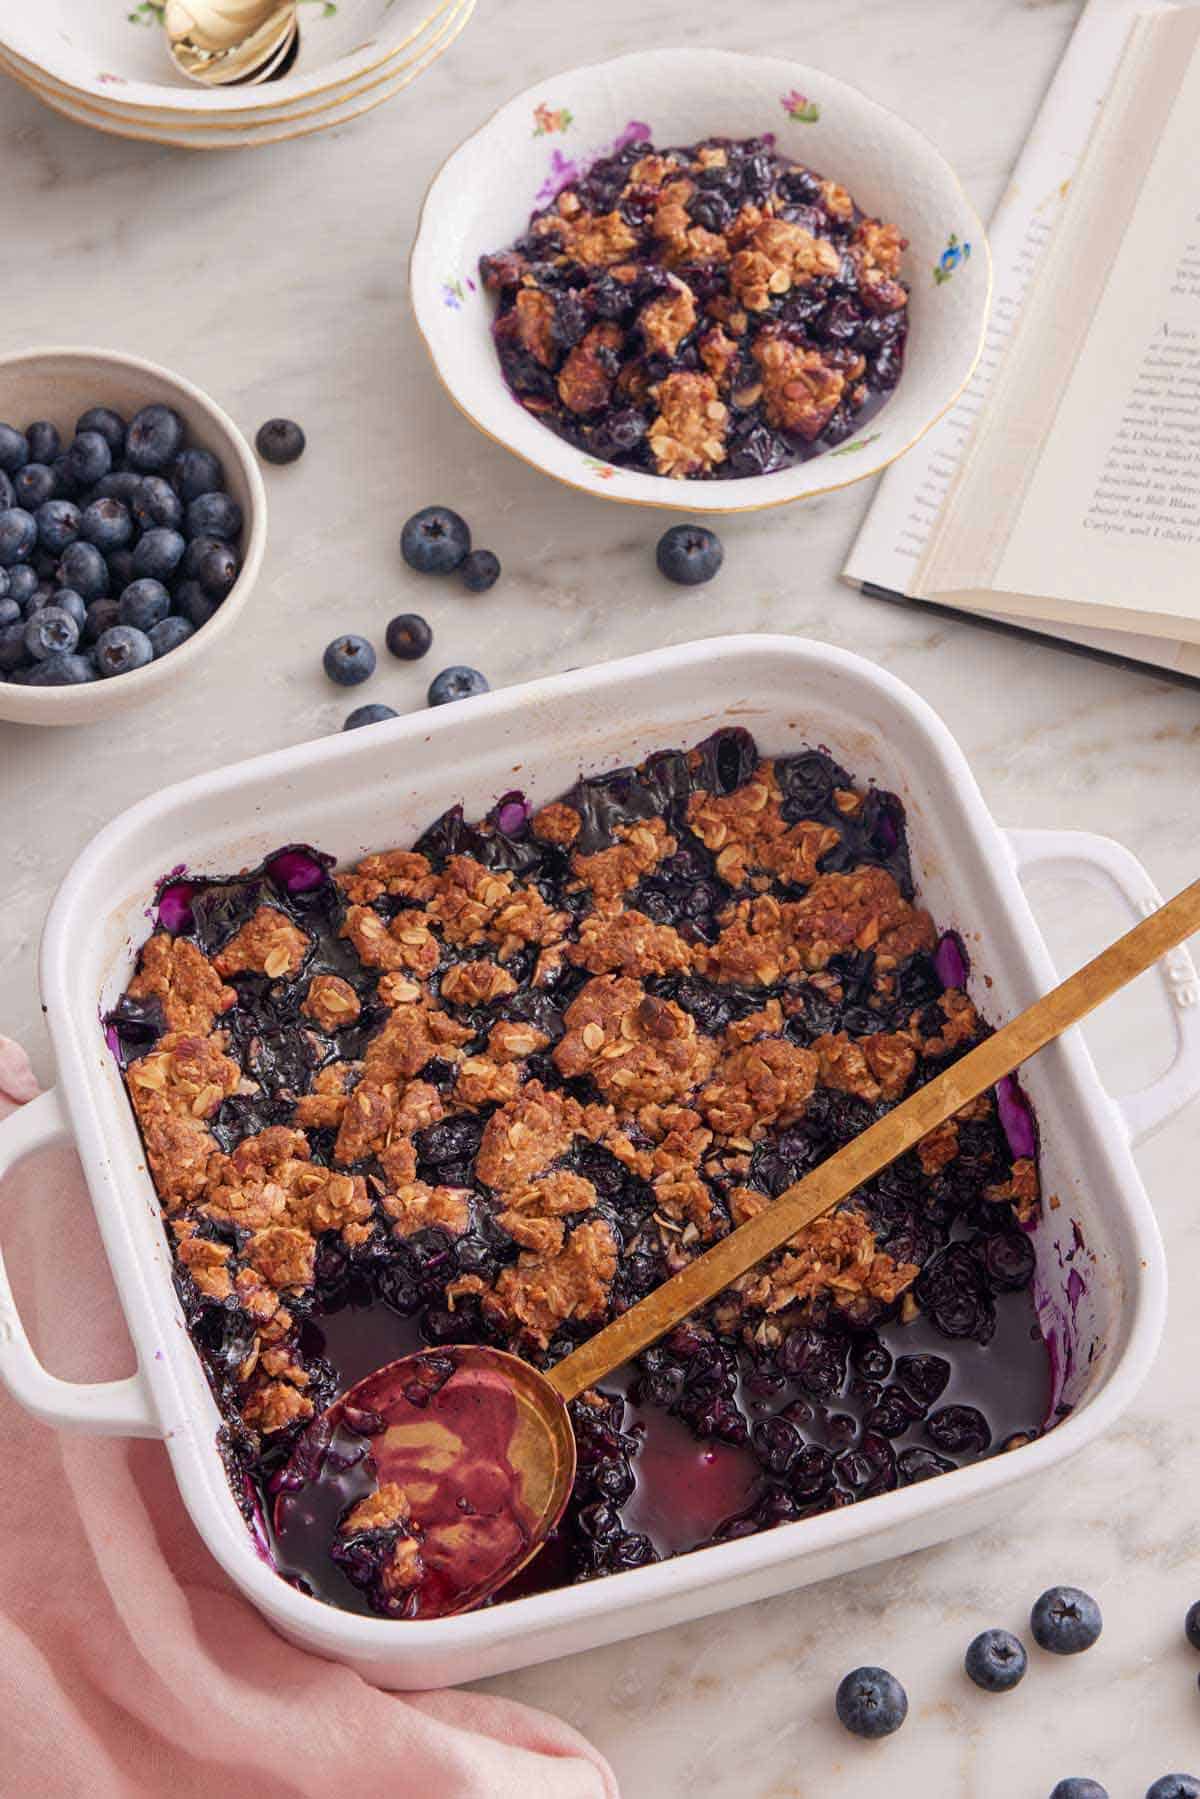 Overhead view of a white baking dish with blueberry crisp with a third scooped out. A serving in the bowl in the back along with a bowl of blueberries and a book.